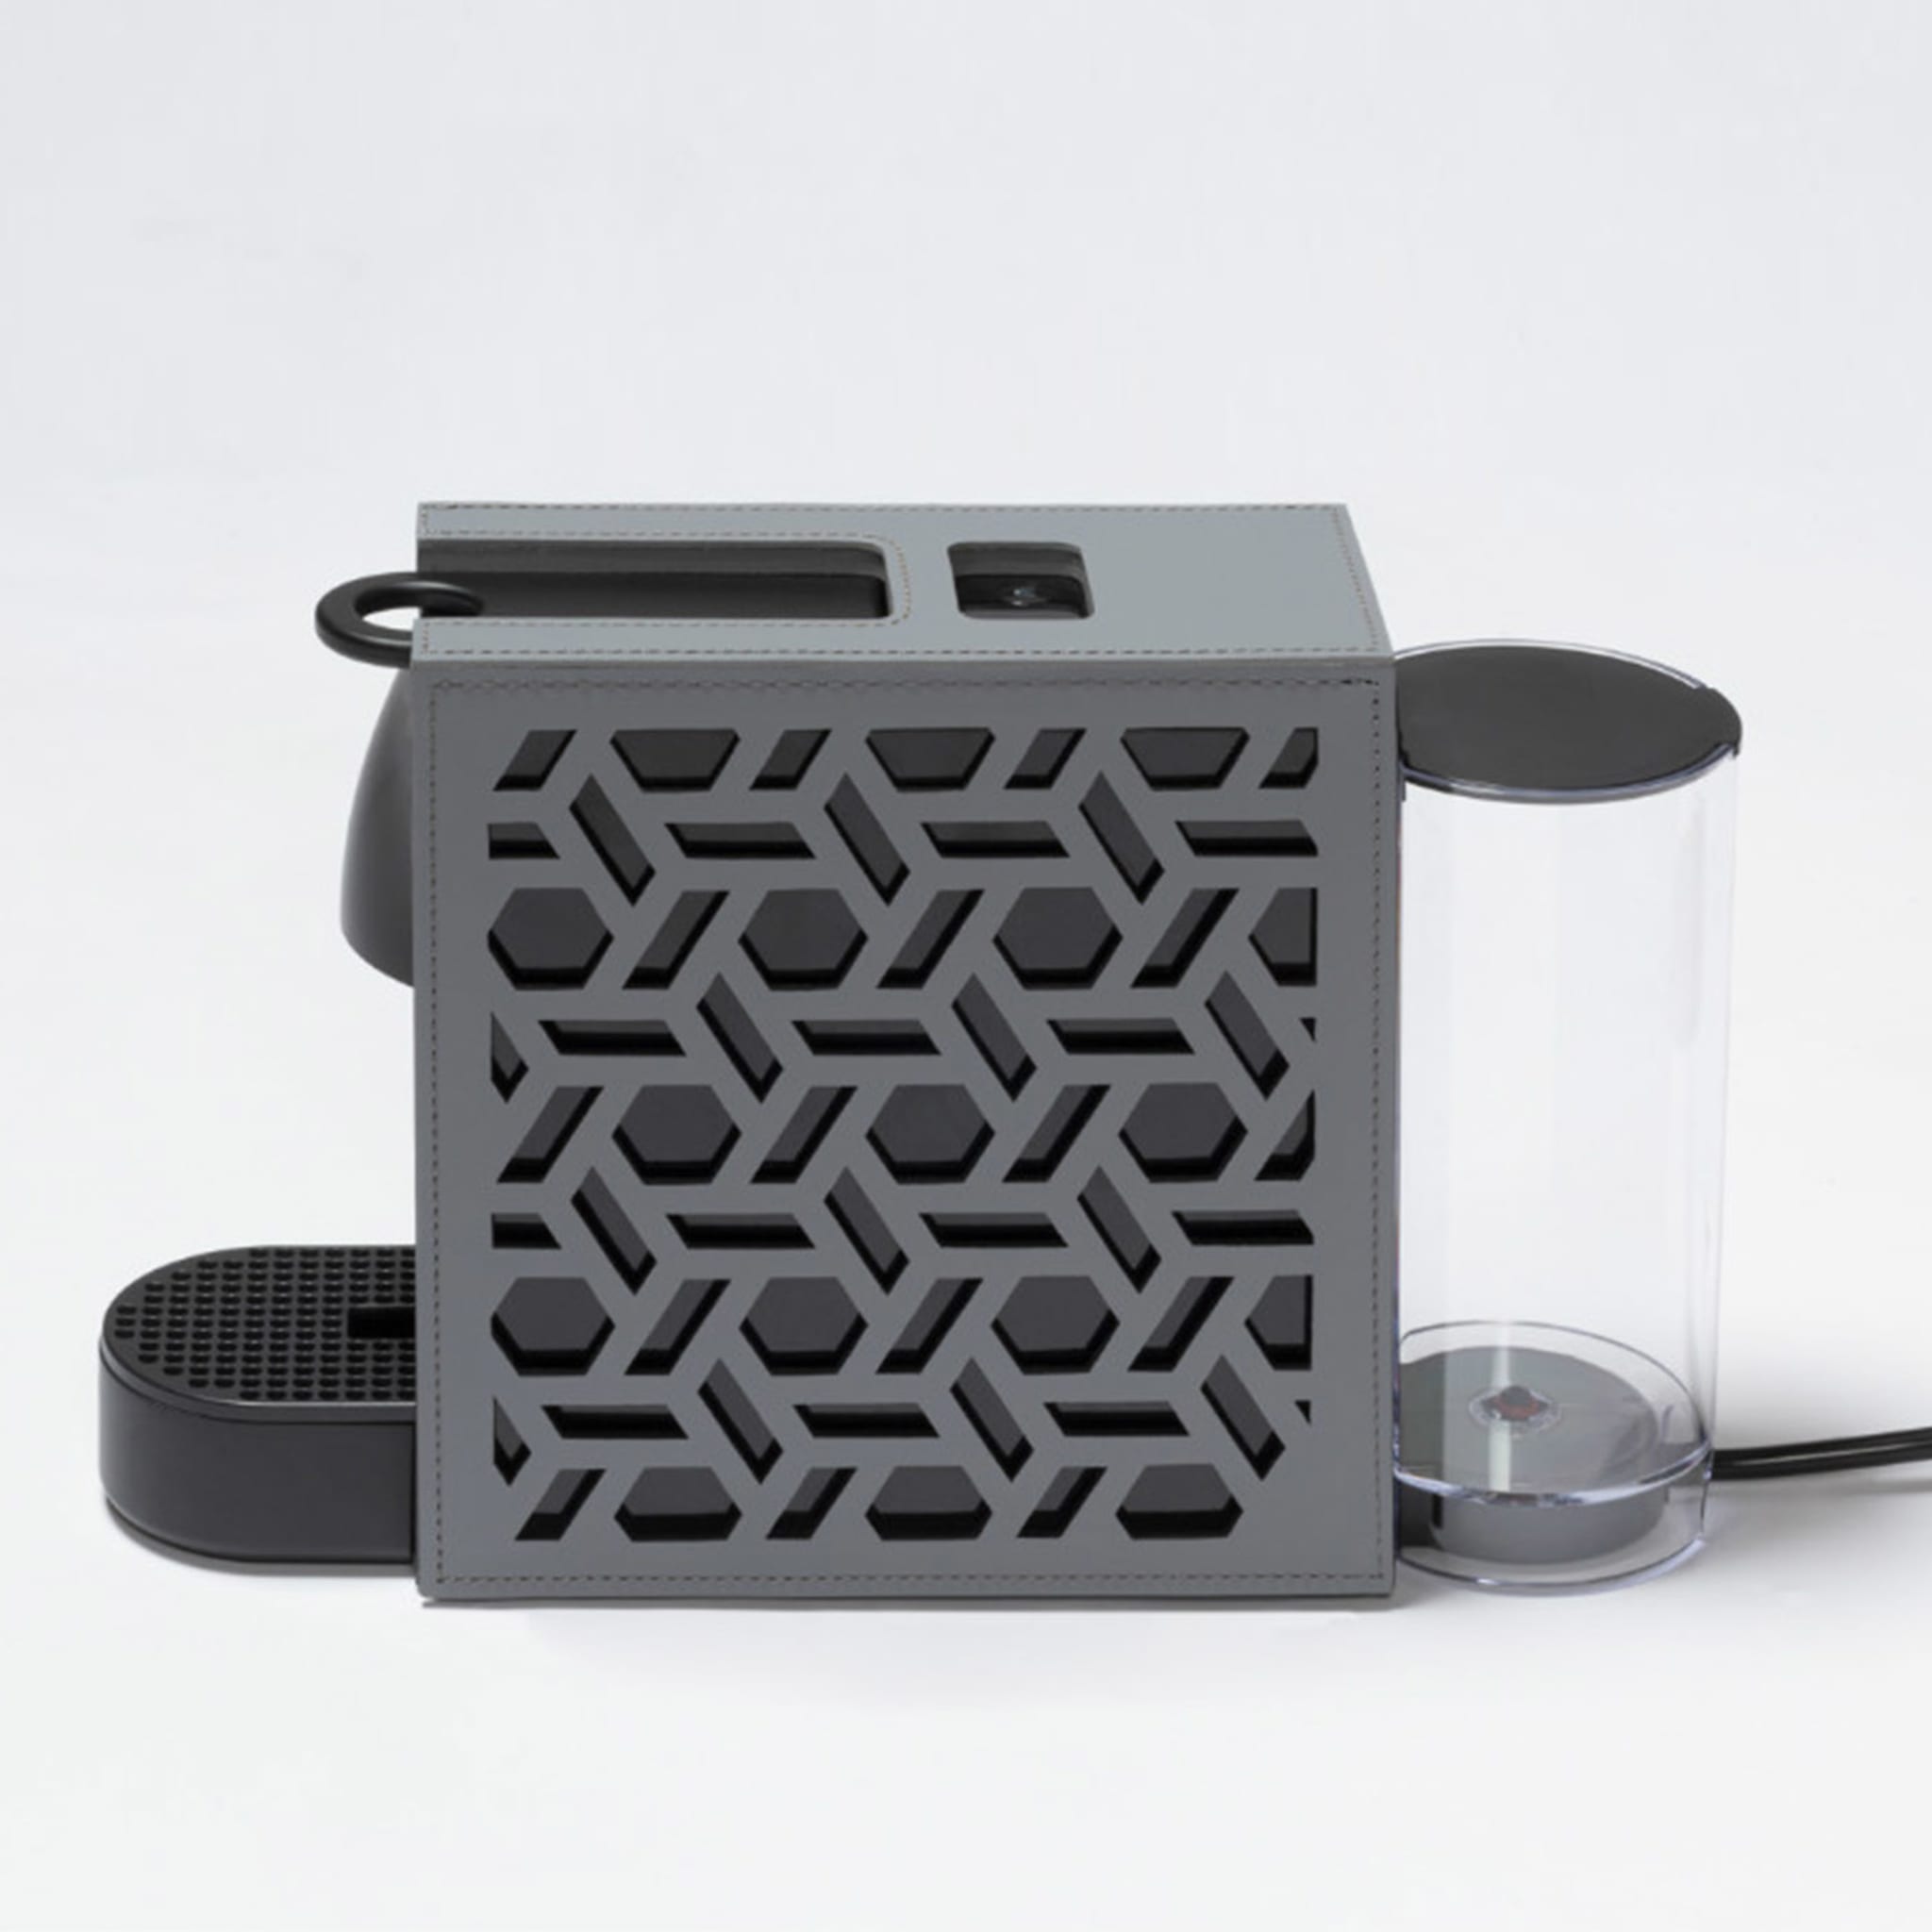 Essenza Coffee Machine with Removable Cover with Patterns - Alternative view 3